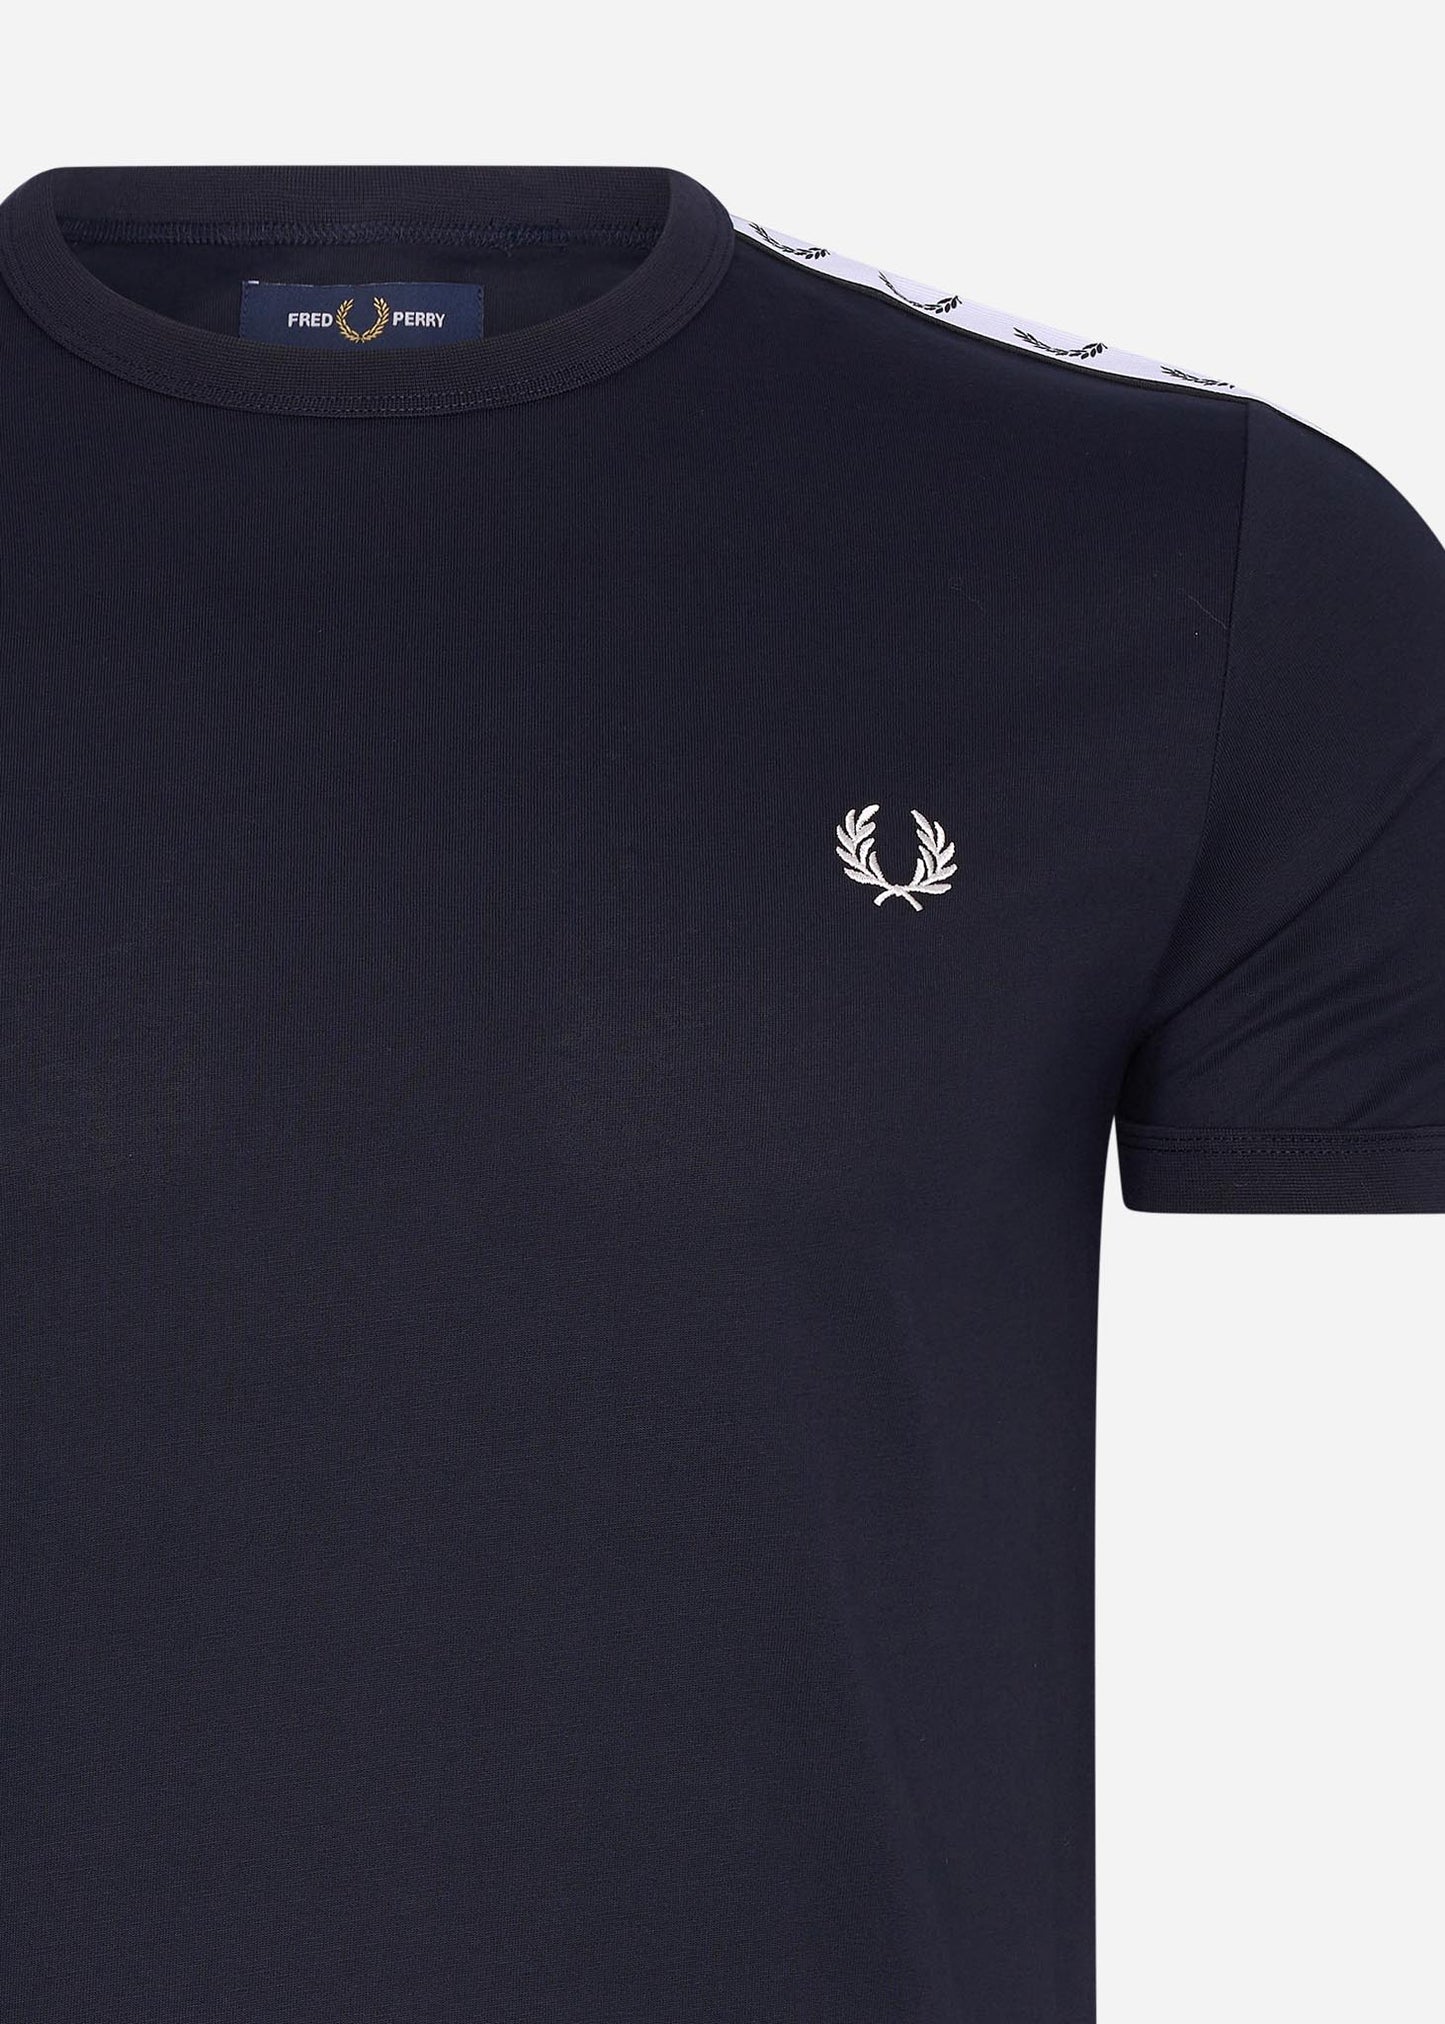 Fred Perry  taped ringer t-shirt navy